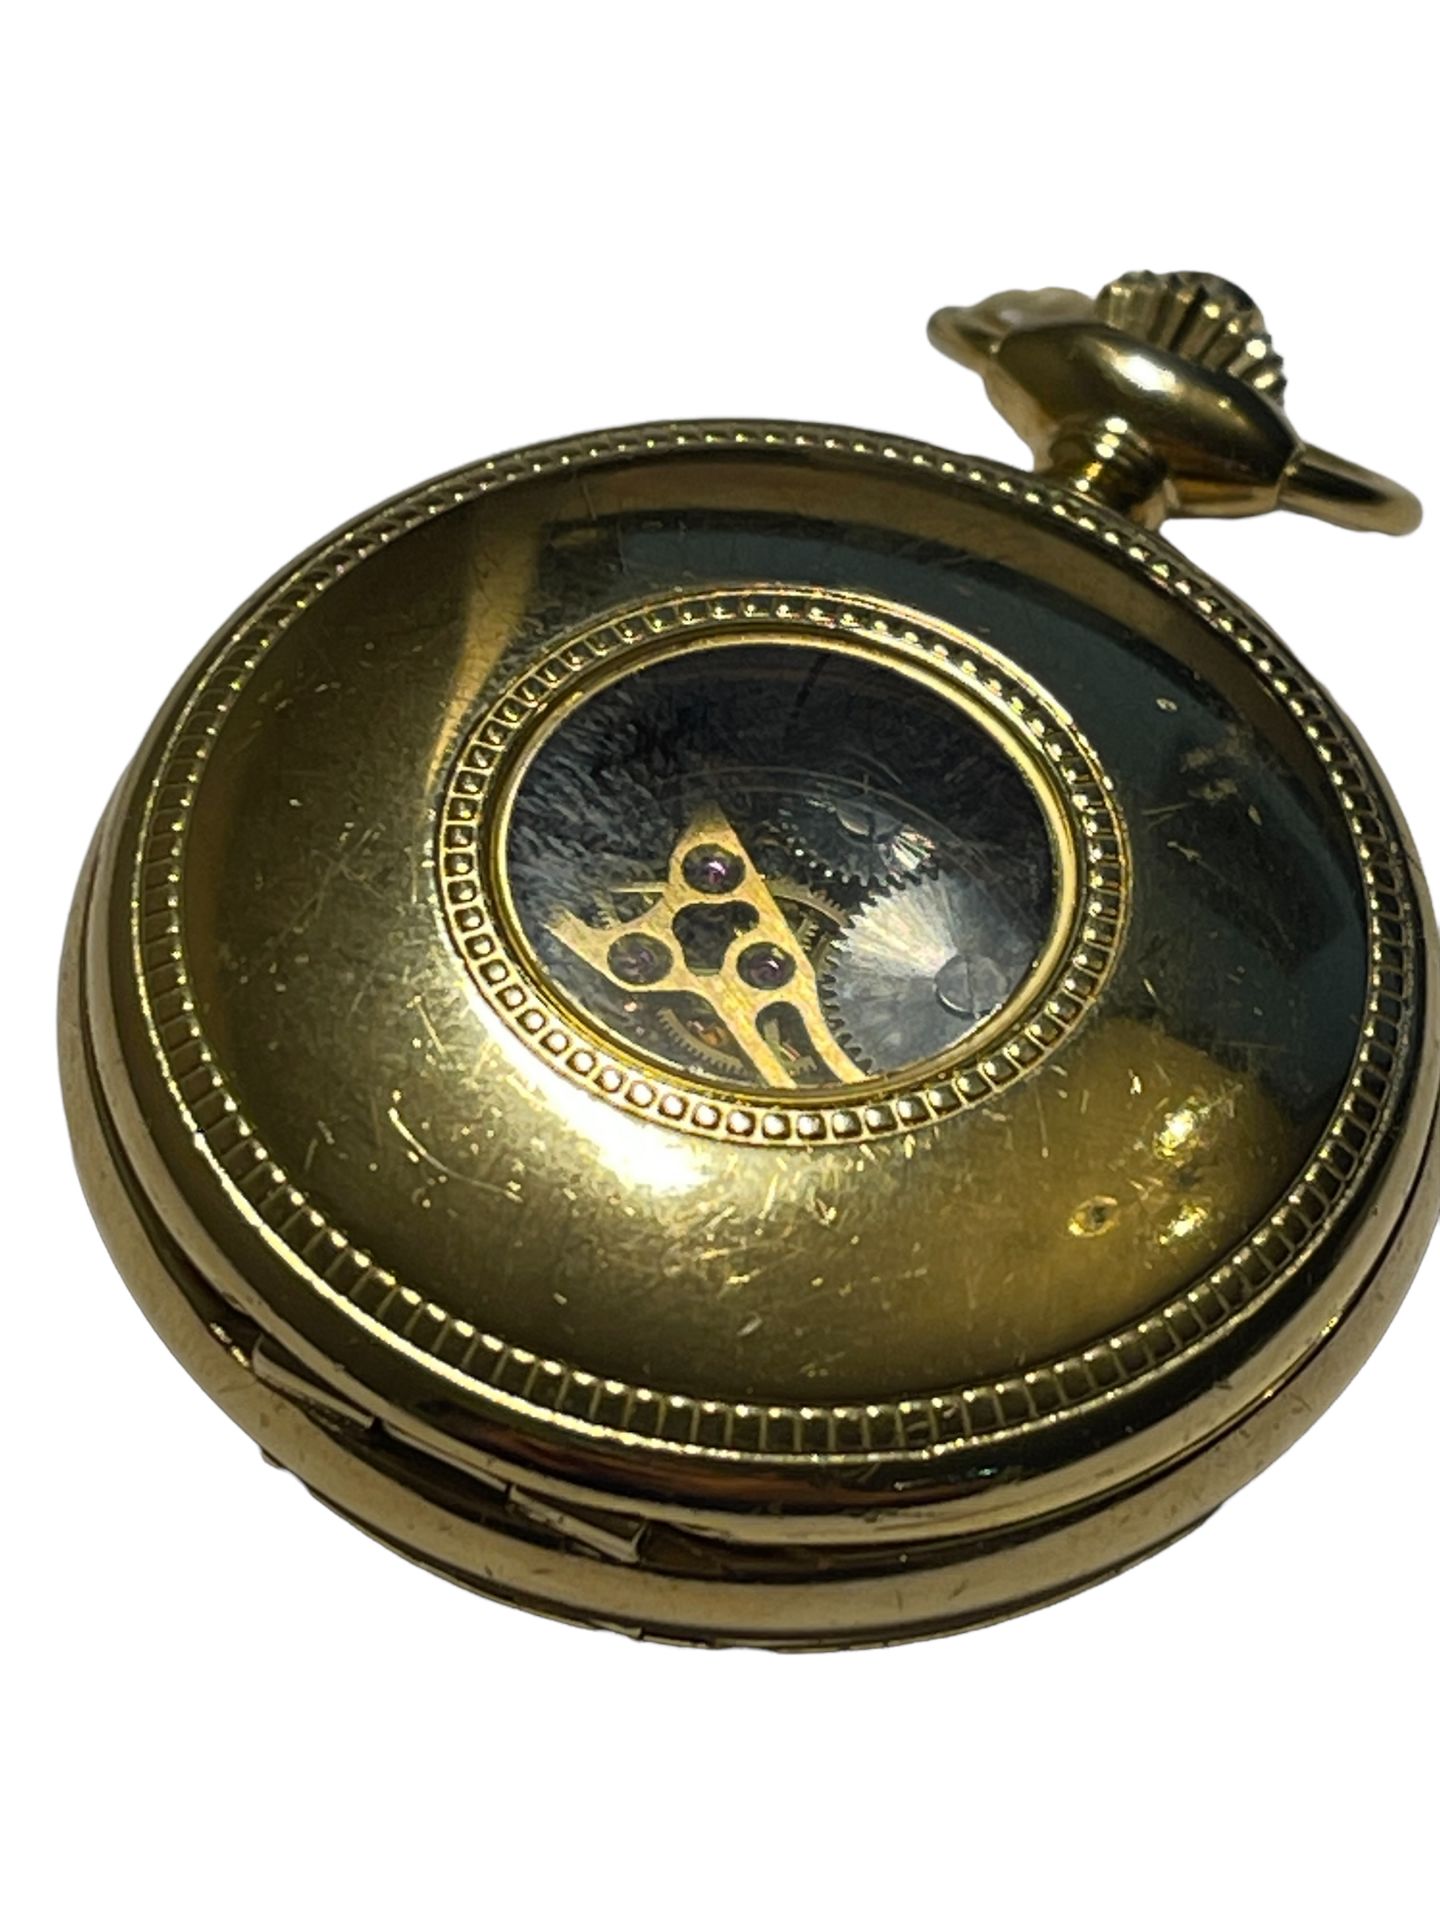 Rotary Gold Plated Mechanical Pocket Watch MP00713/01 RRP £209 - Ex Demo - Image 7 of 11